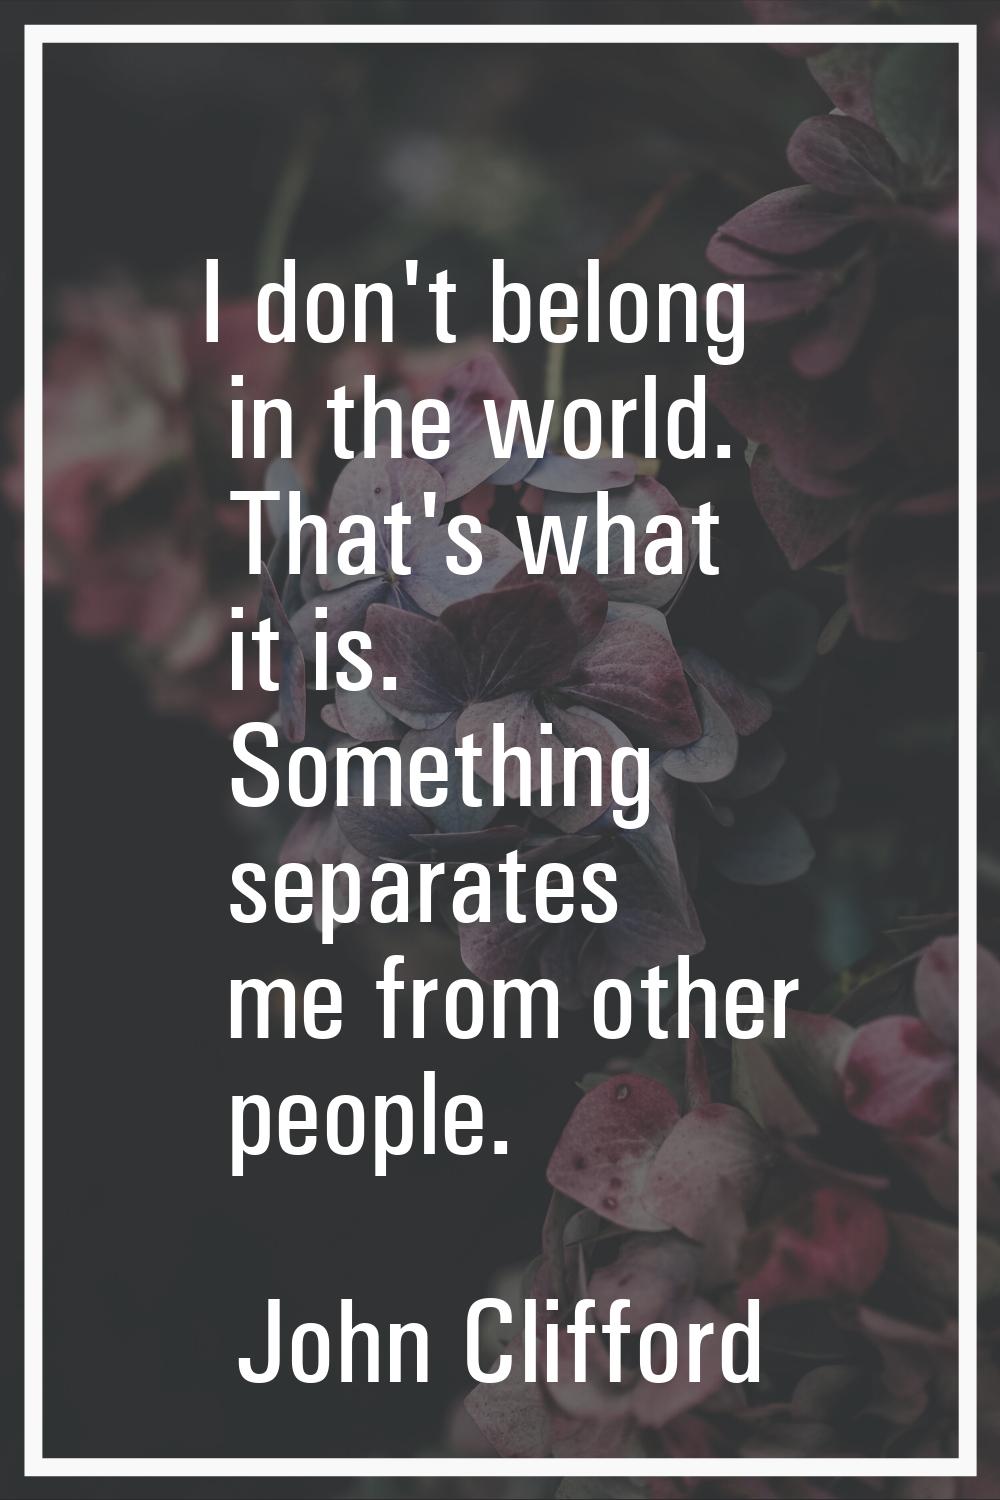 I don't belong in the world. That's what it is. Something separates me from other people.